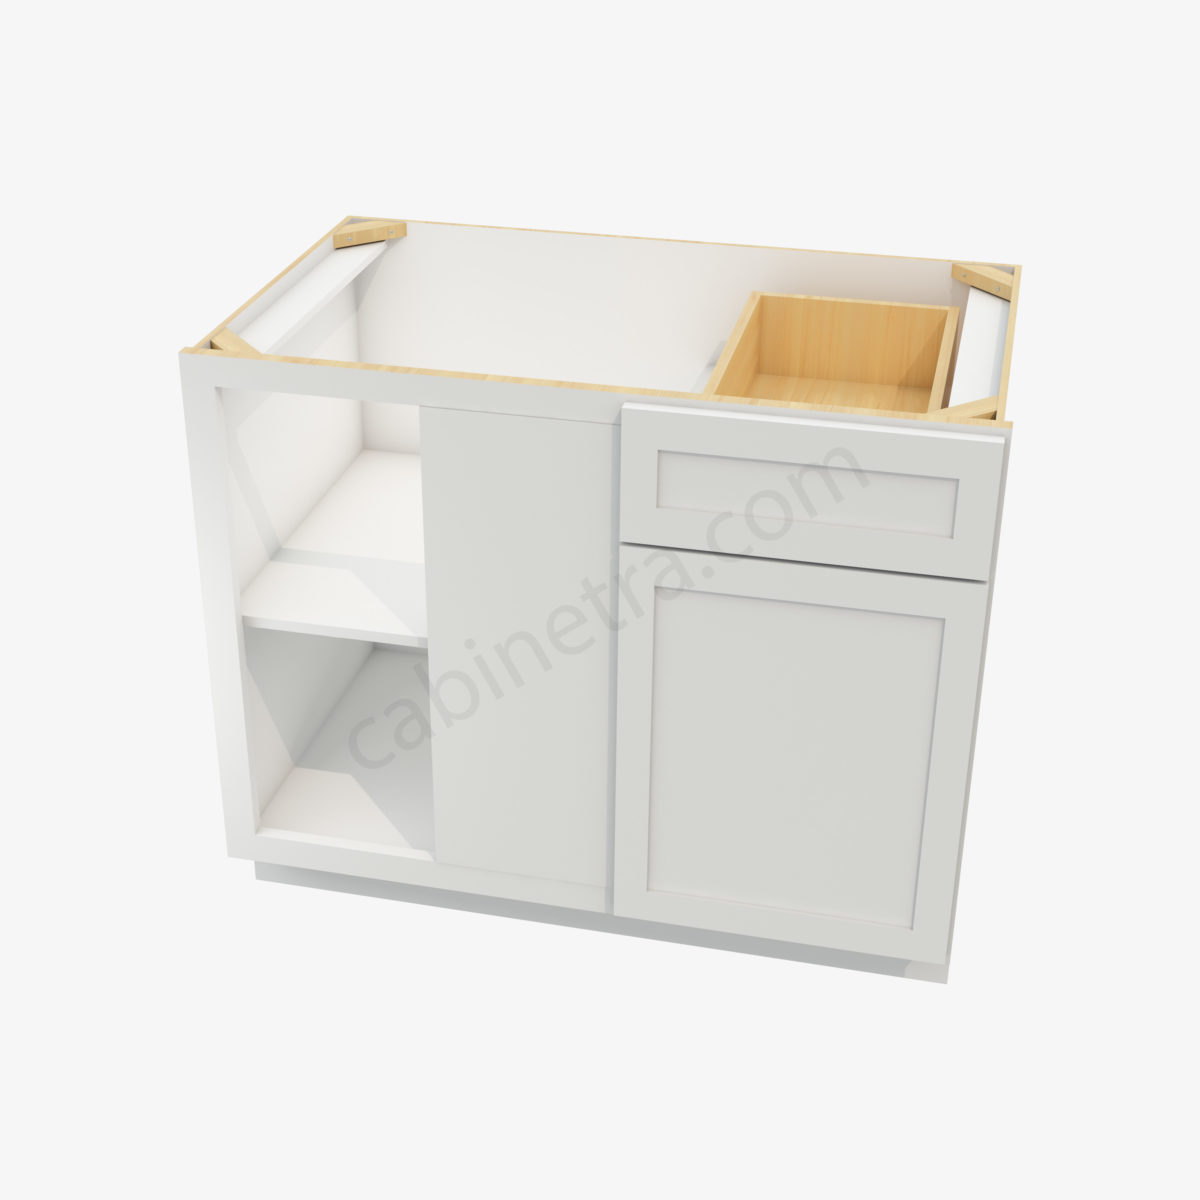 AW BBLC42 45 39W 3 Forevermark Ice White Shaker Cabinetra scaled